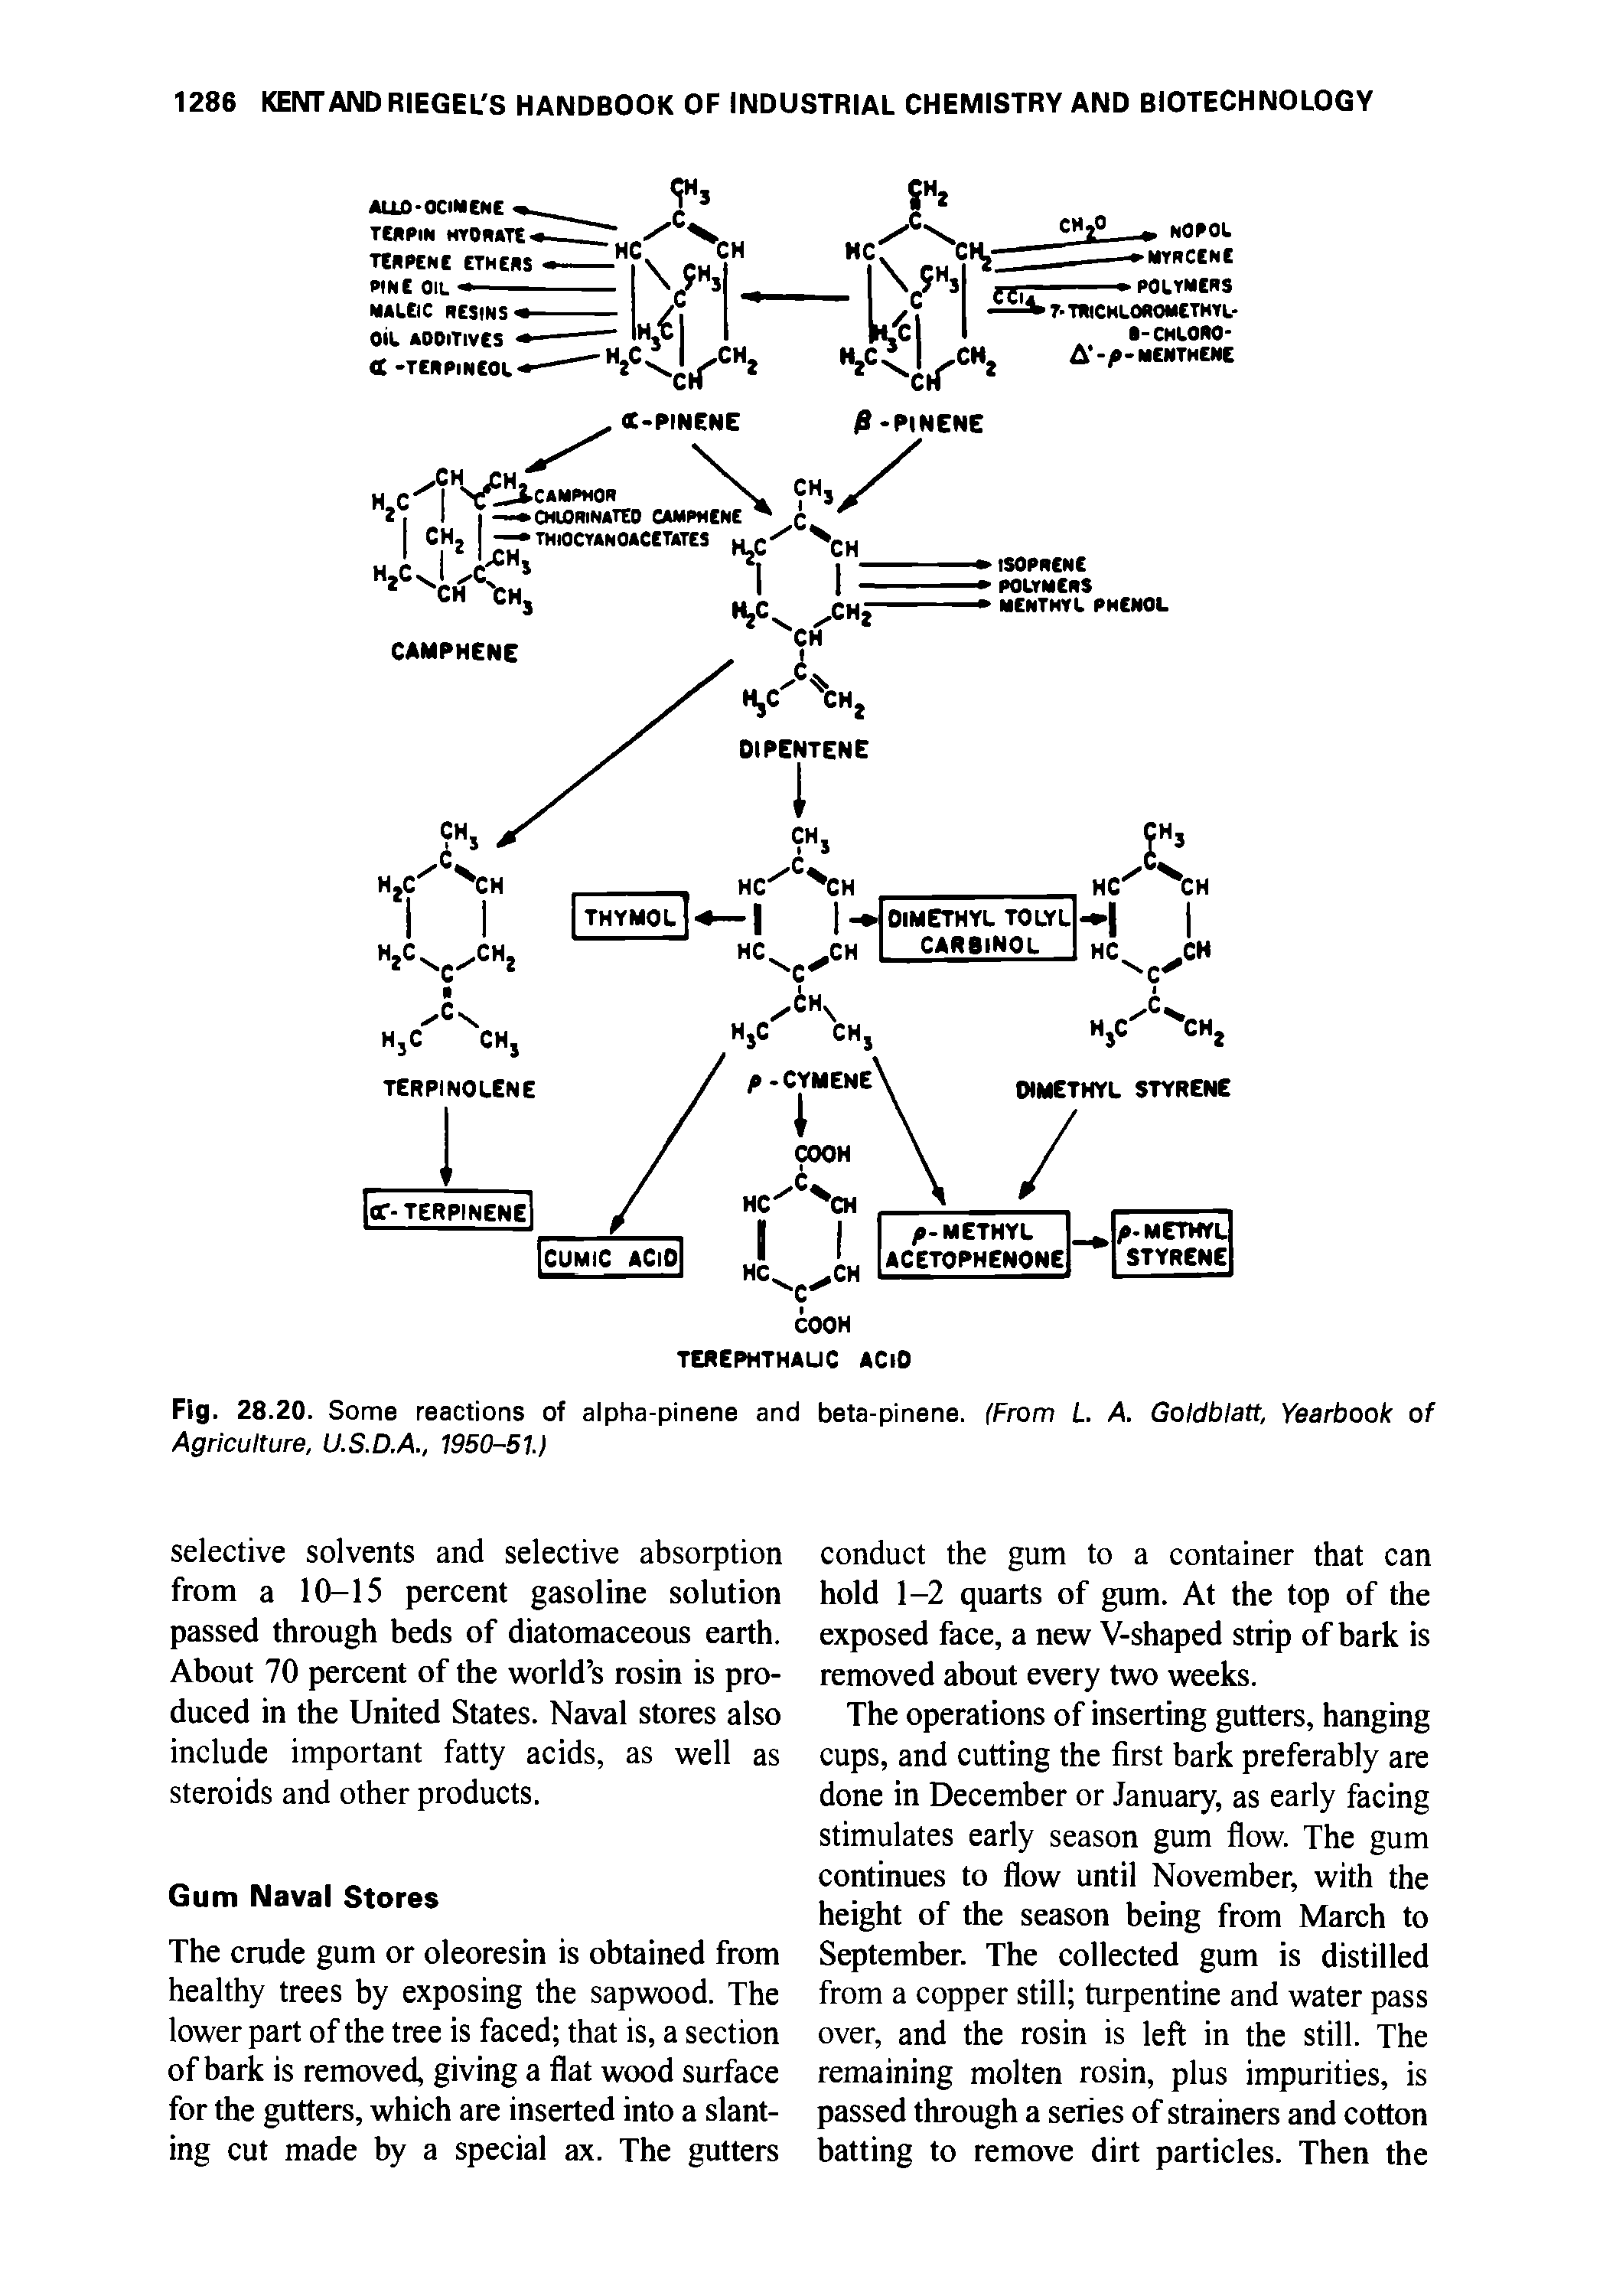 Fig. 28.20. Some reactions of alpha-pinene and beta-pinene. (From L A. Goldblatt, Yearbook of Agriculture, U.S.D.A., 1950-51.)...